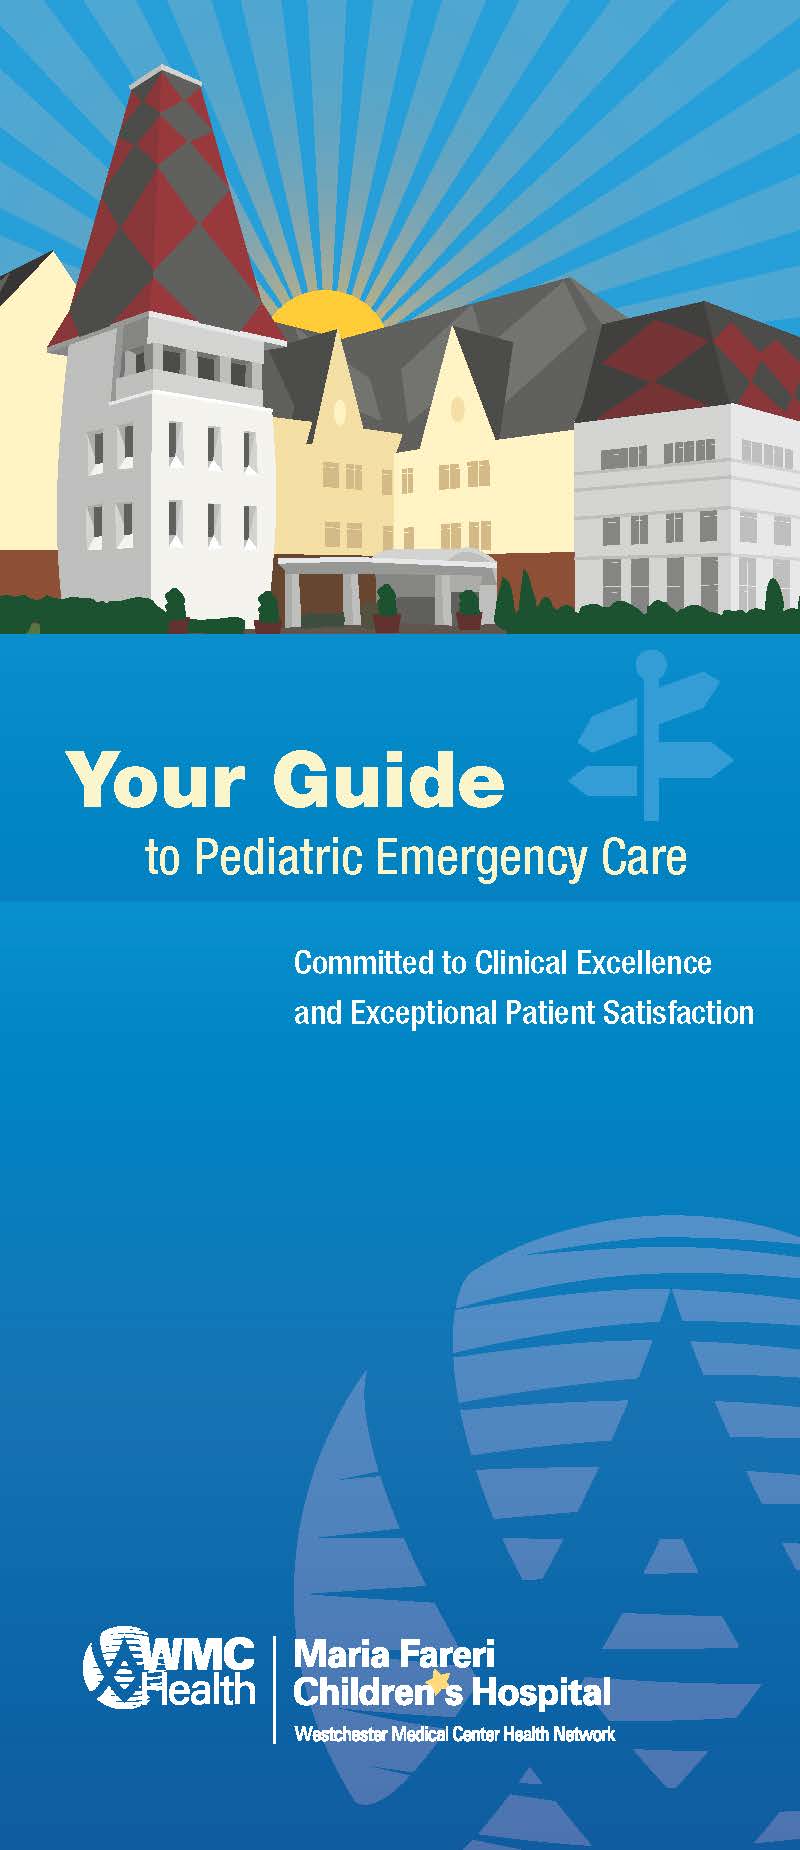 Download our pediatric emergency care guide